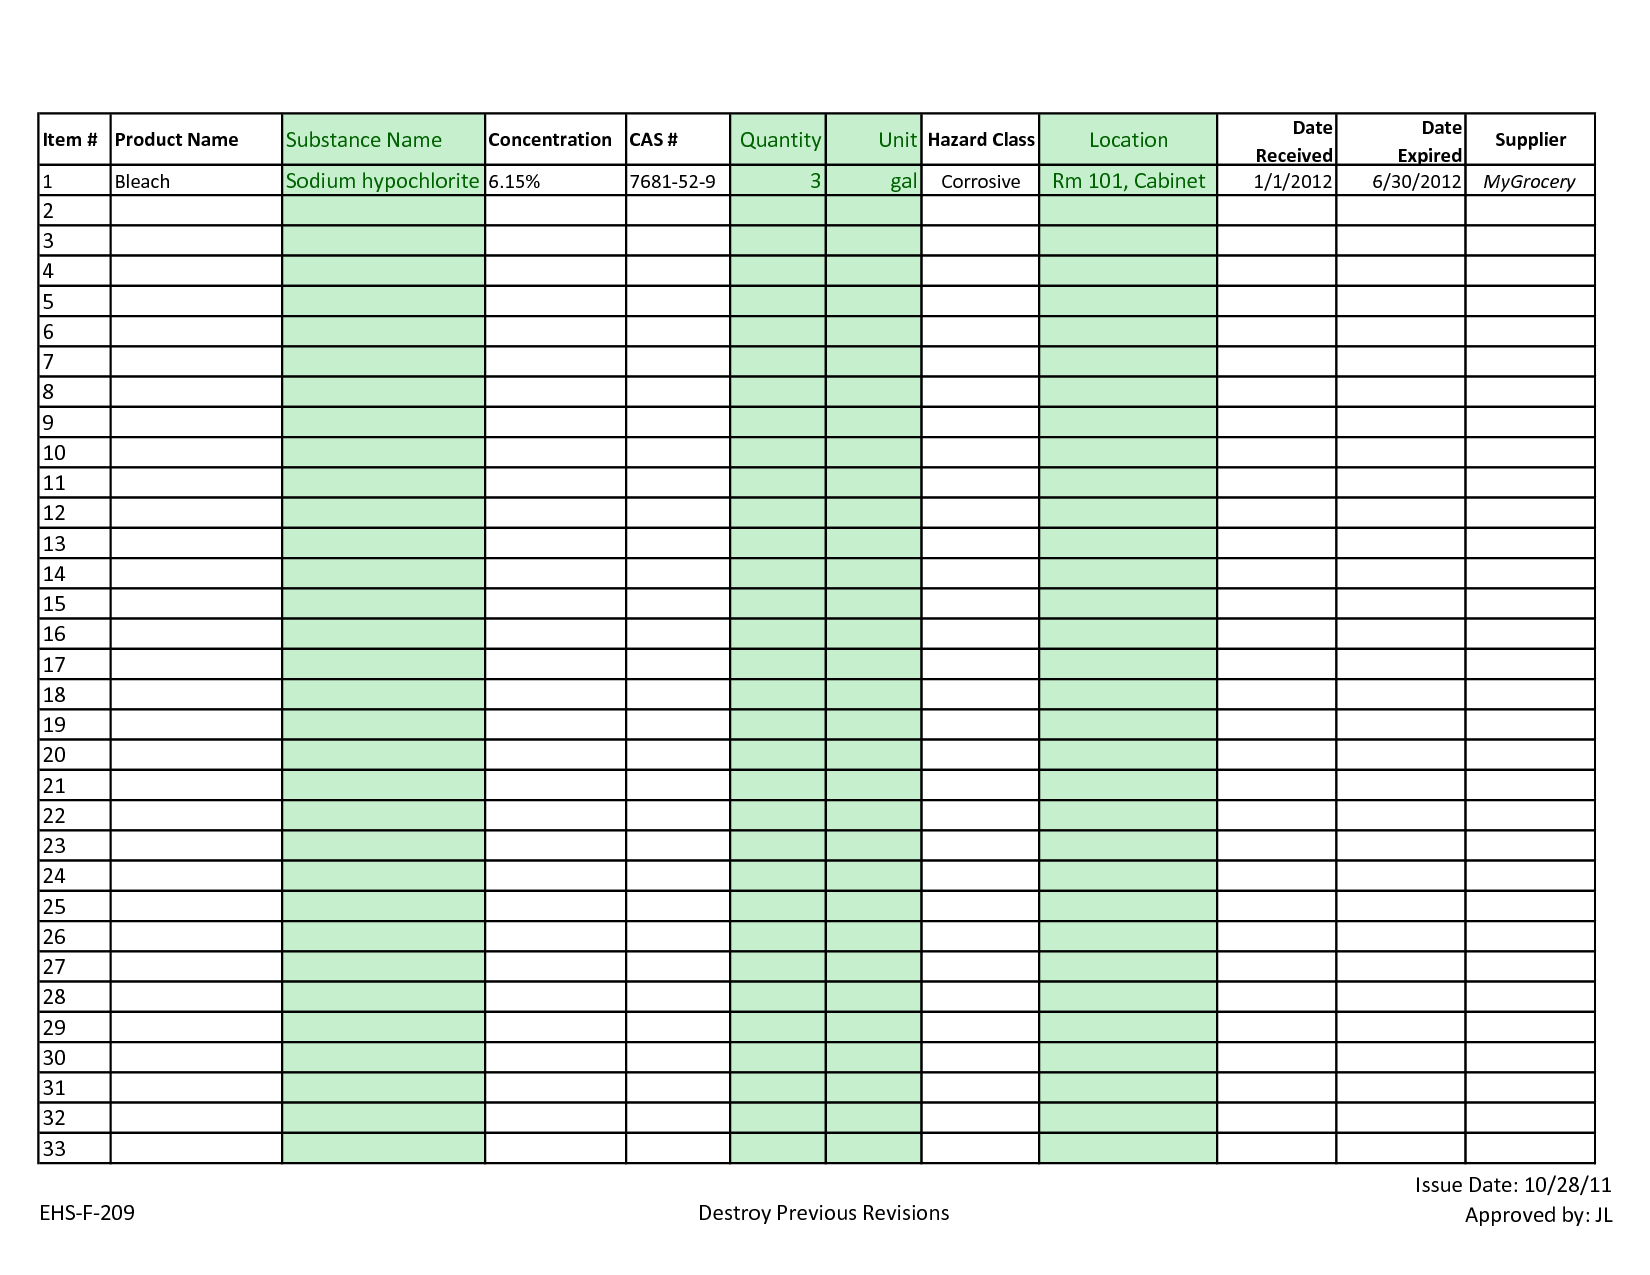 Excel Inventory Tracking Spreadsheet Template Pertaining To Free Inventory Tracking Spreadsheet And Best Photos Of Excel